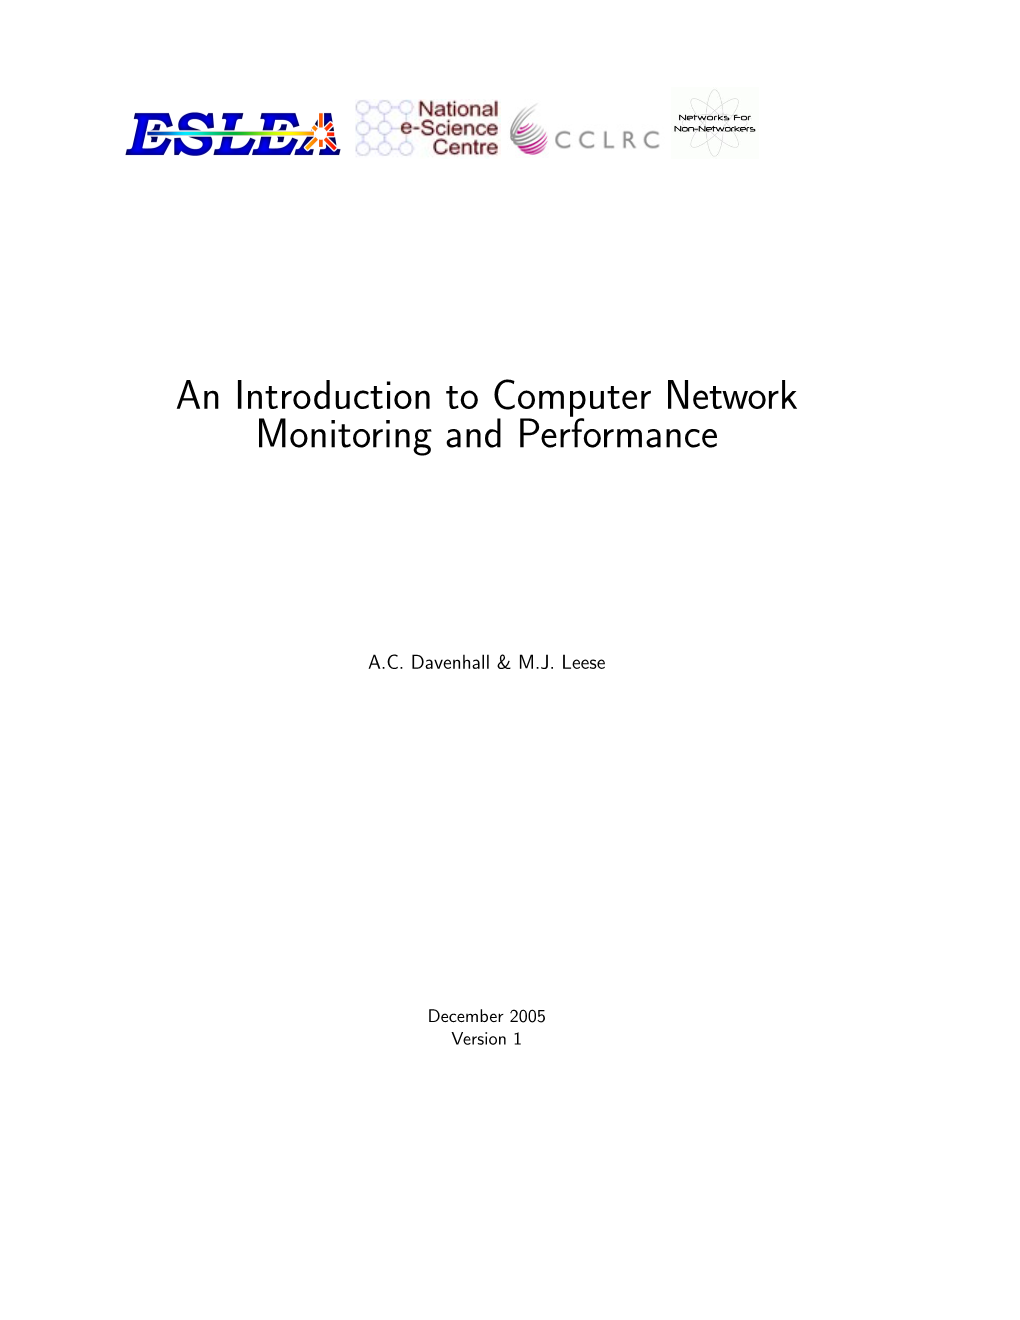 An Introduction to Computer Network Monitoring and Performance